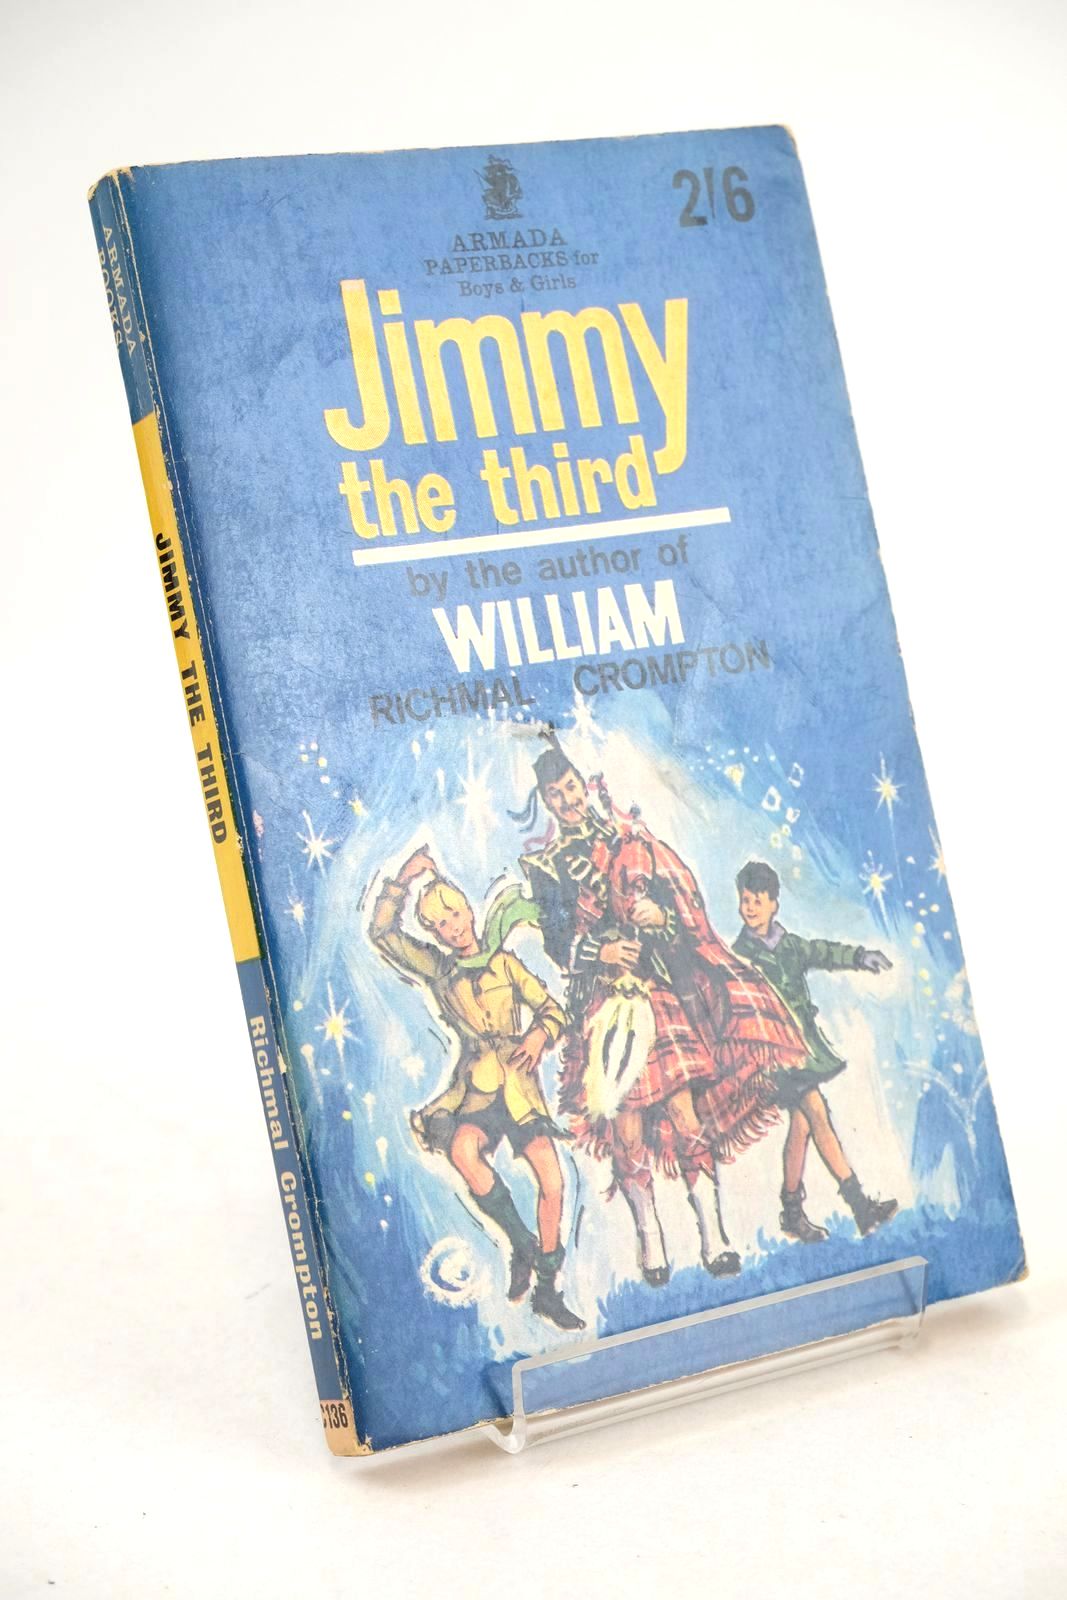 Photo of JIMMY THE THIRD written by Crompton, Richmal illustrated by Roberts, Lunt published by Armada (STOCK CODE: 1326057)  for sale by Stella & Rose's Books